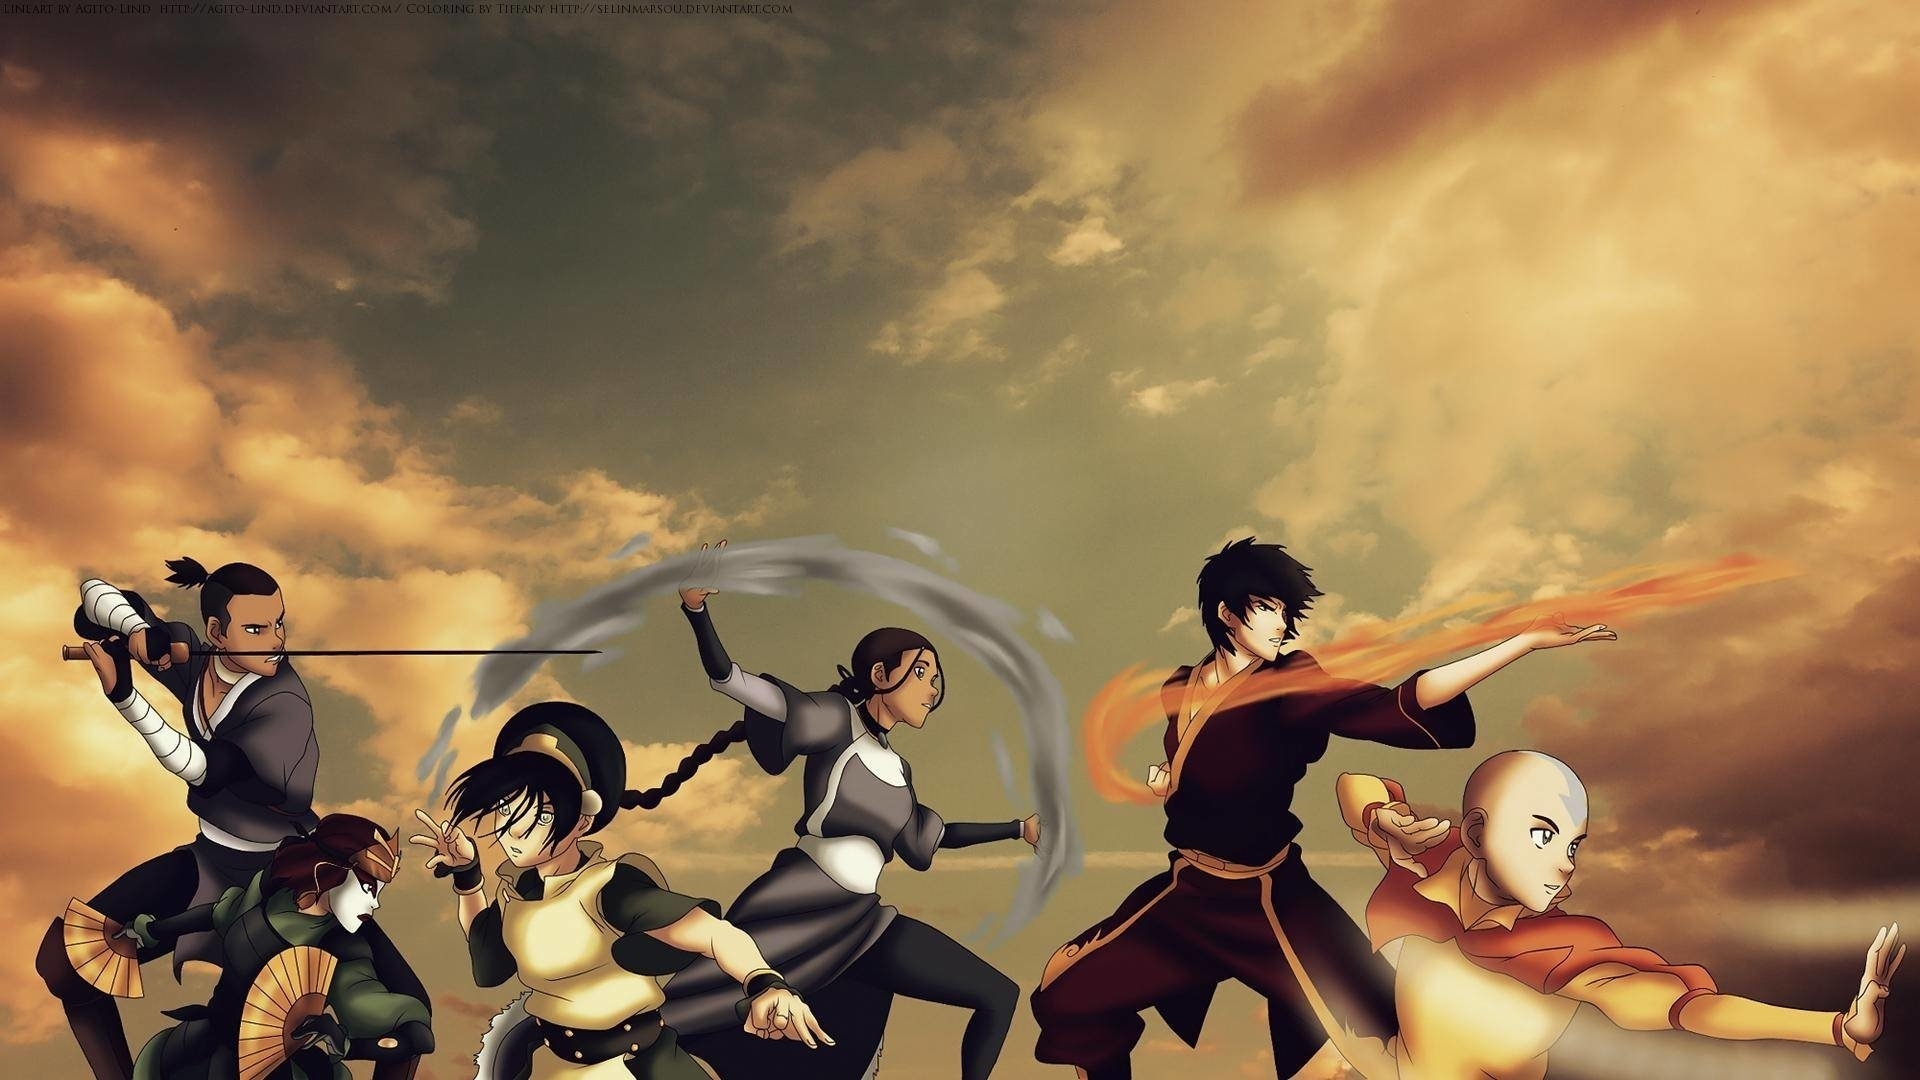 10 Latest Avatar The Last Airbender Wallpaper 1920X1080 FULL HD 1920×1080 For PC Background